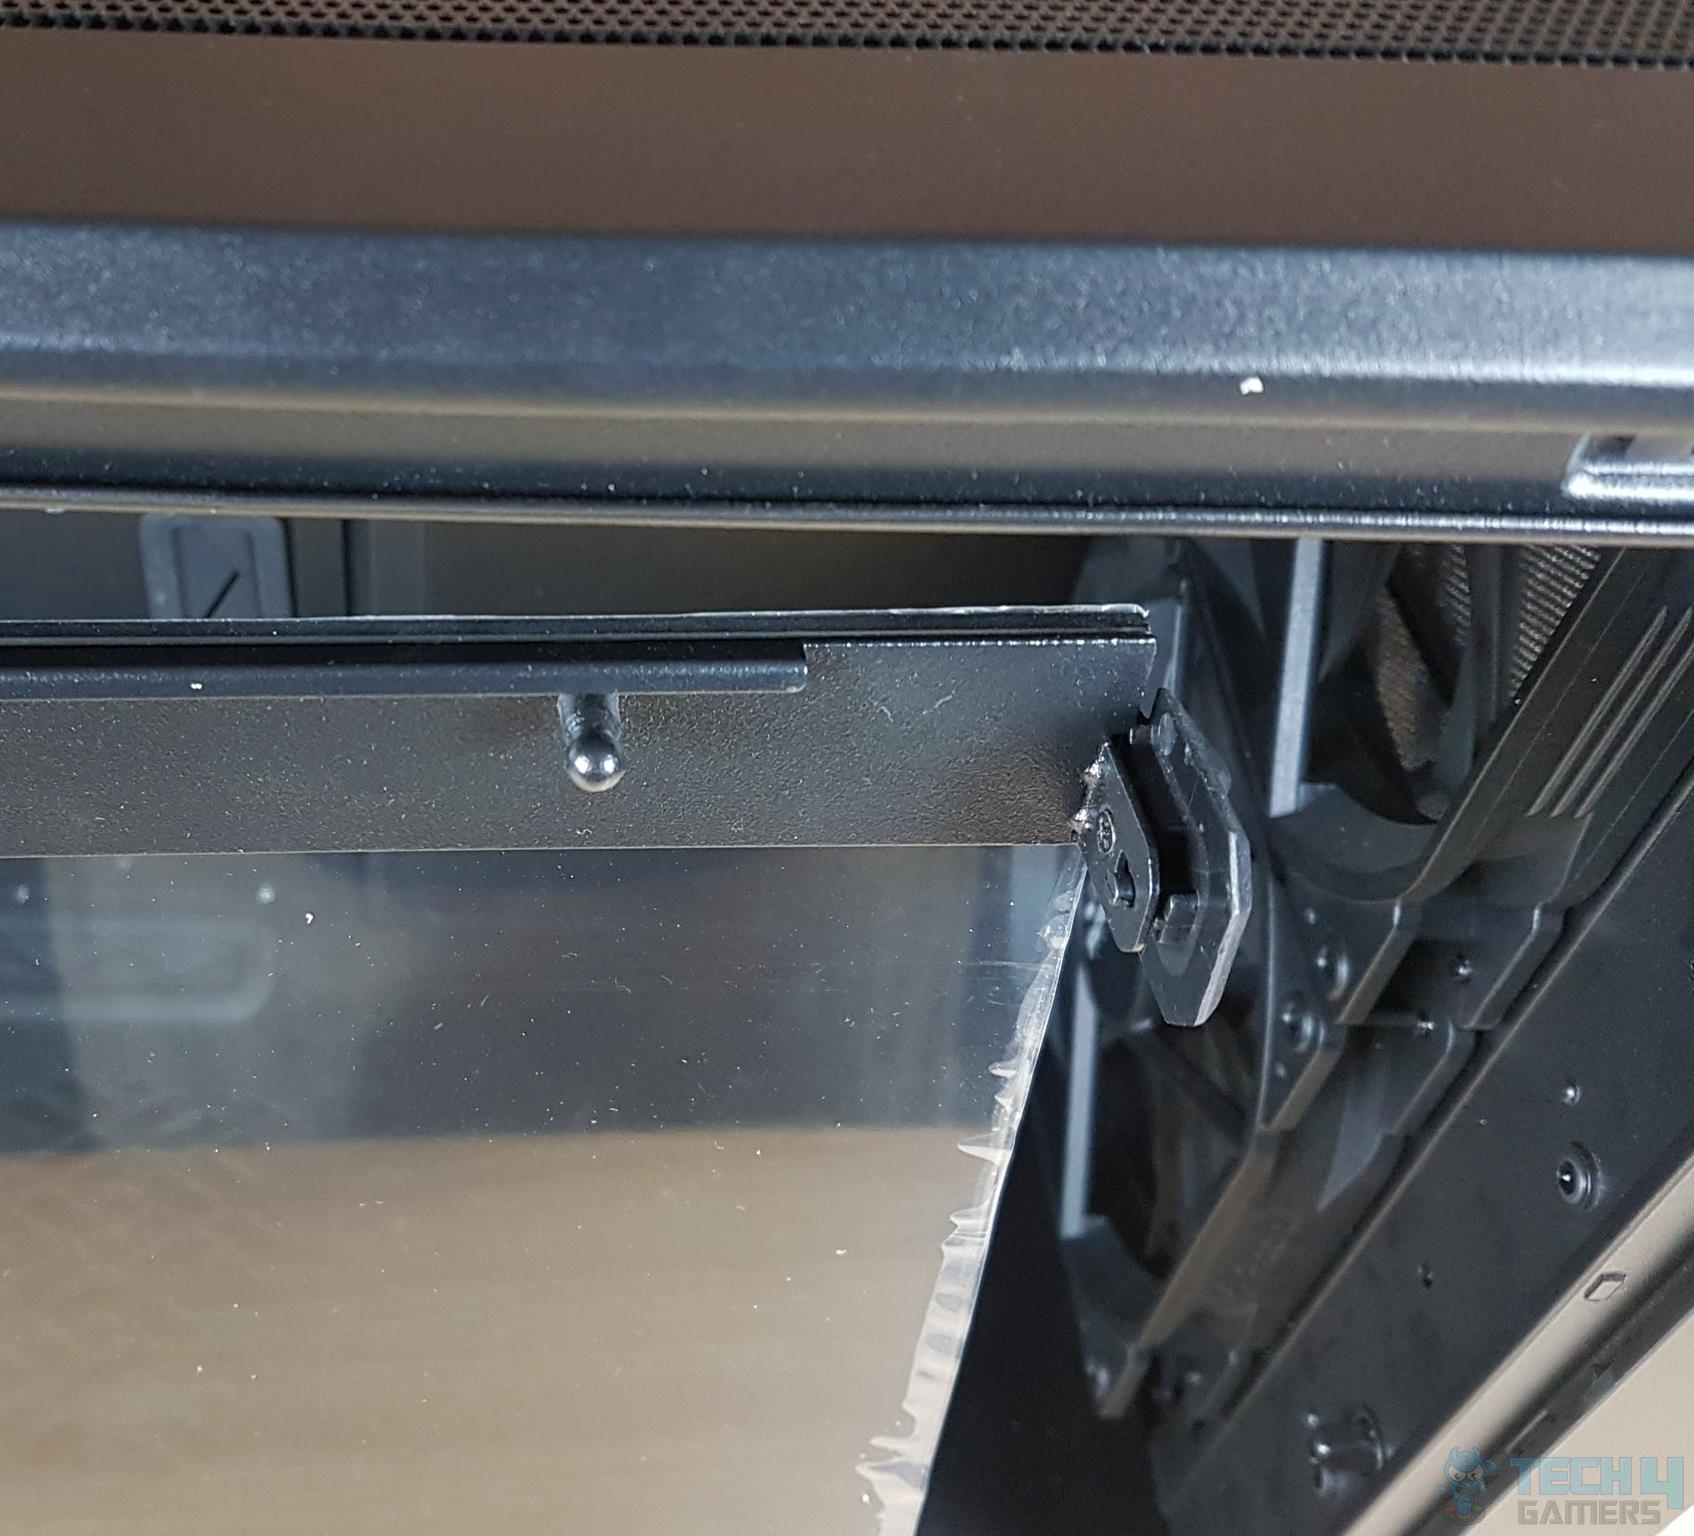 Fractal Design Meshify 2 — Mounting mechanism of this glass panel